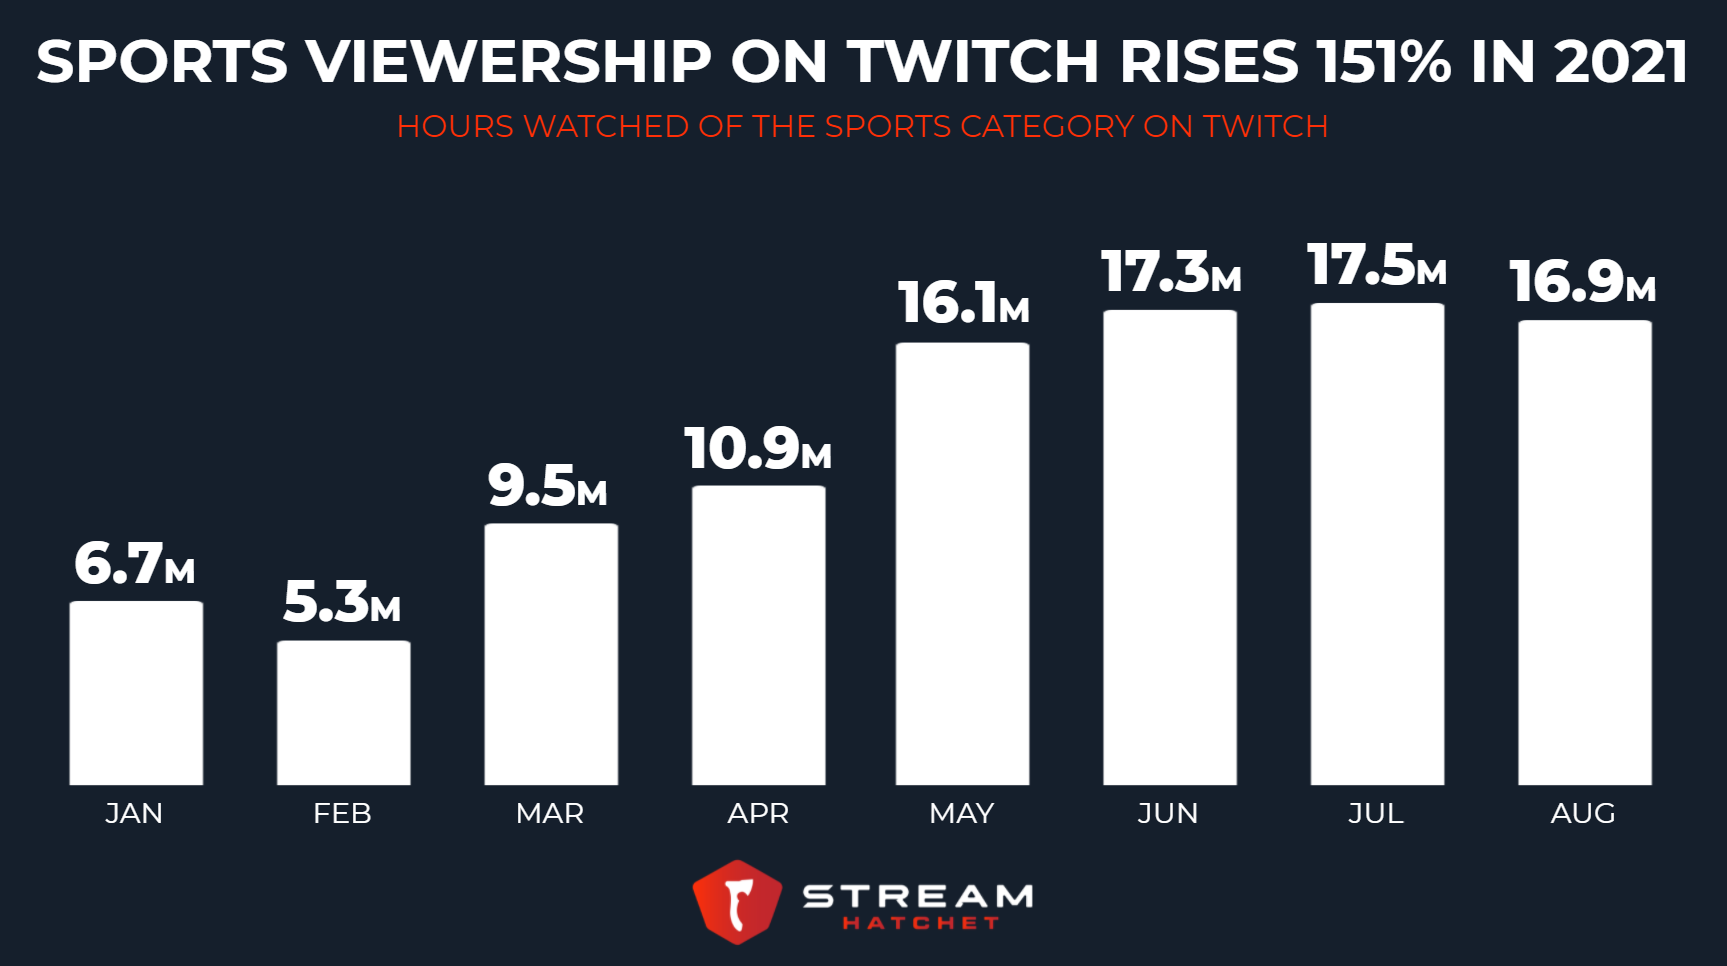 Sports Viewership on Twitch Rises 151% in 2021